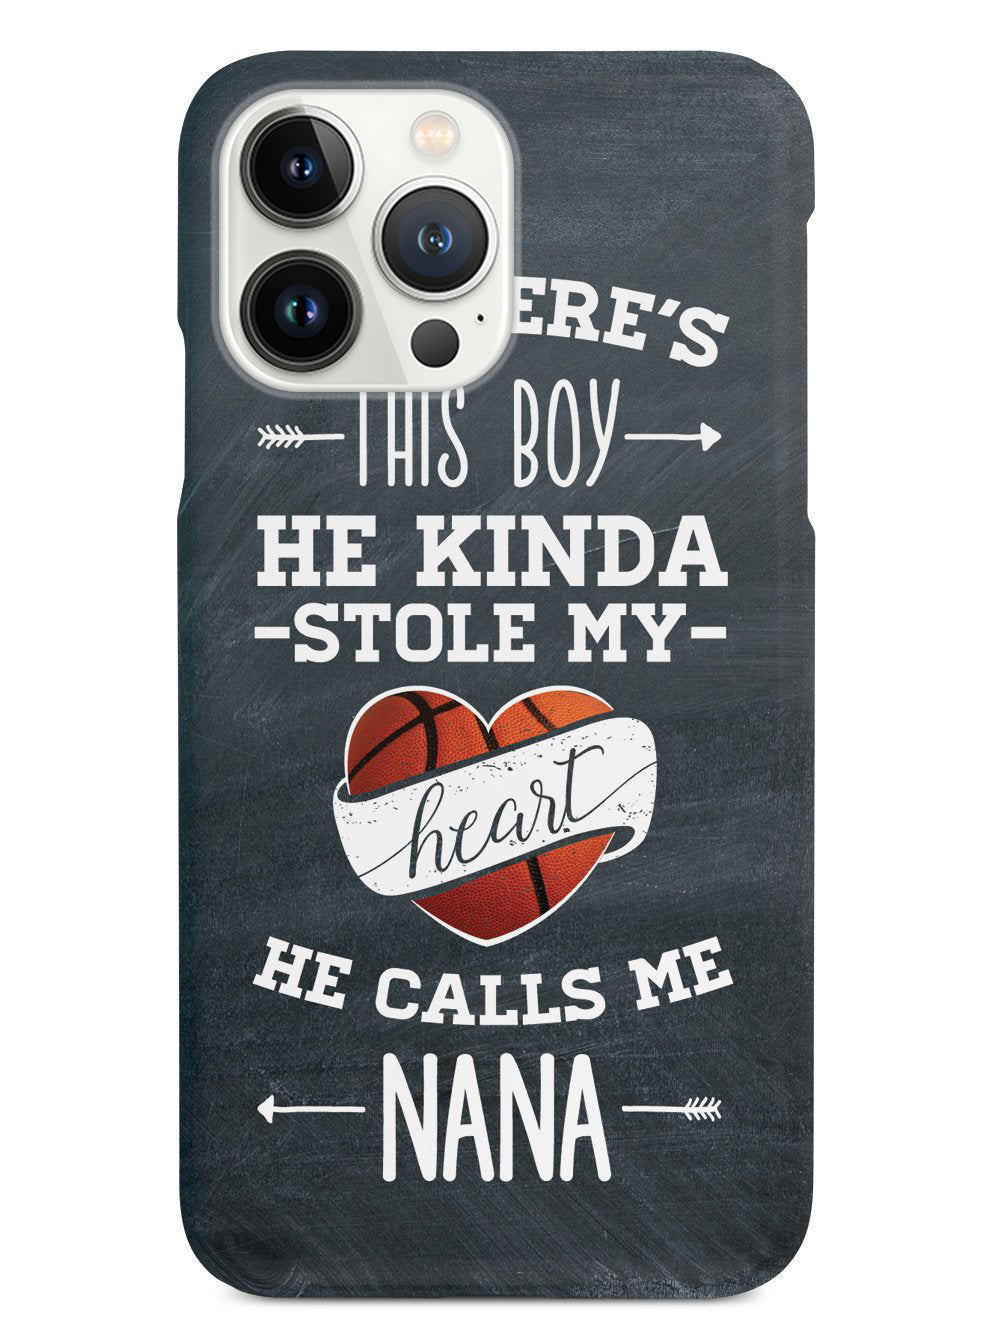 So there's this Boy - Basketball Player - Nana Case